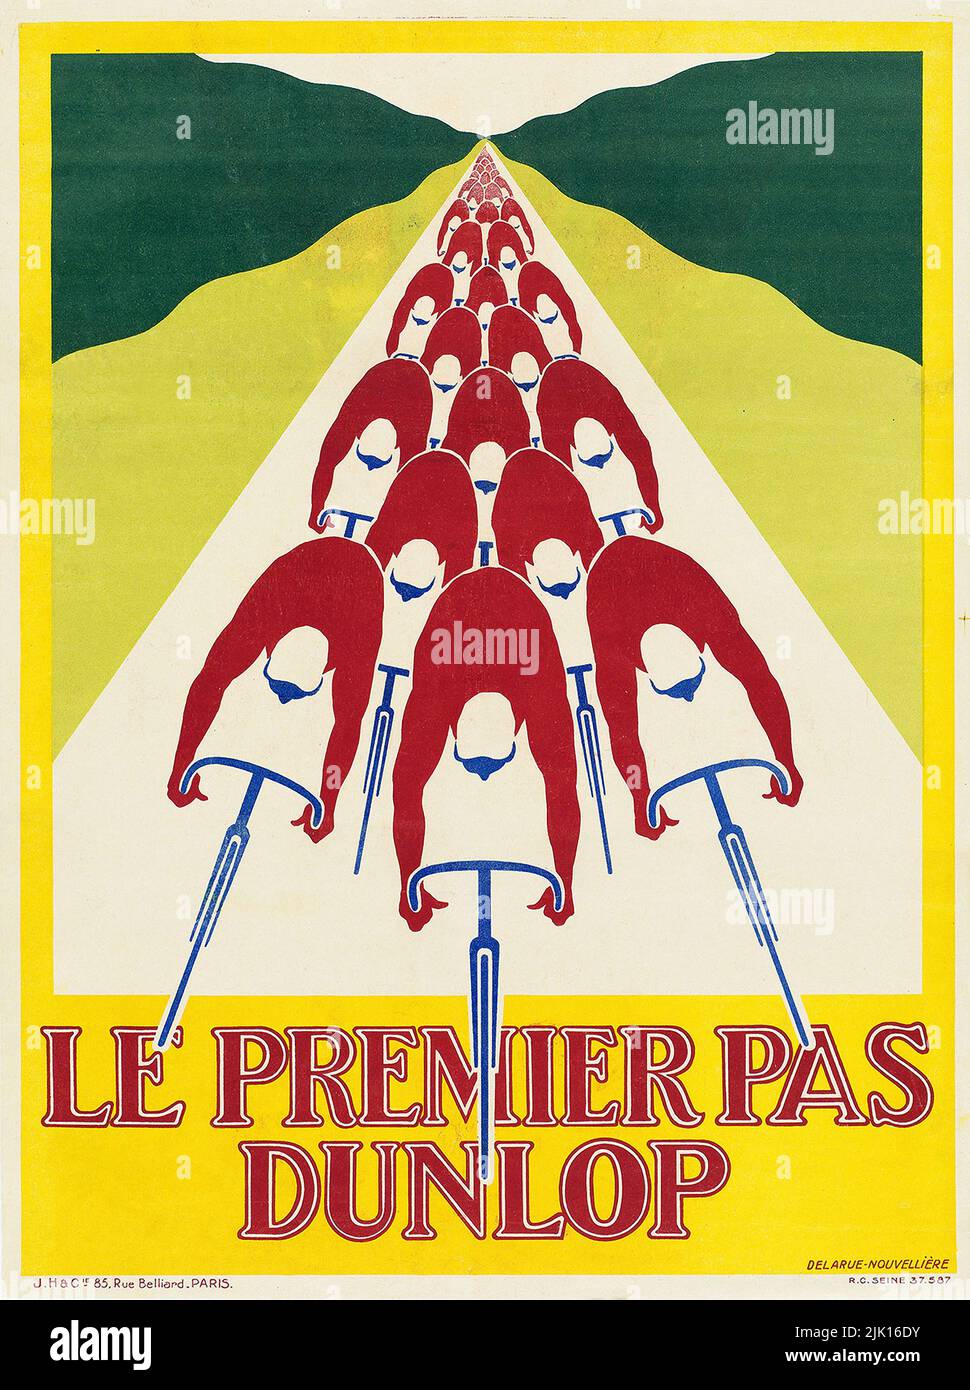 Vintage French Cycling Poster - LE PREMIER PAS DUNLOP . Stock Photo